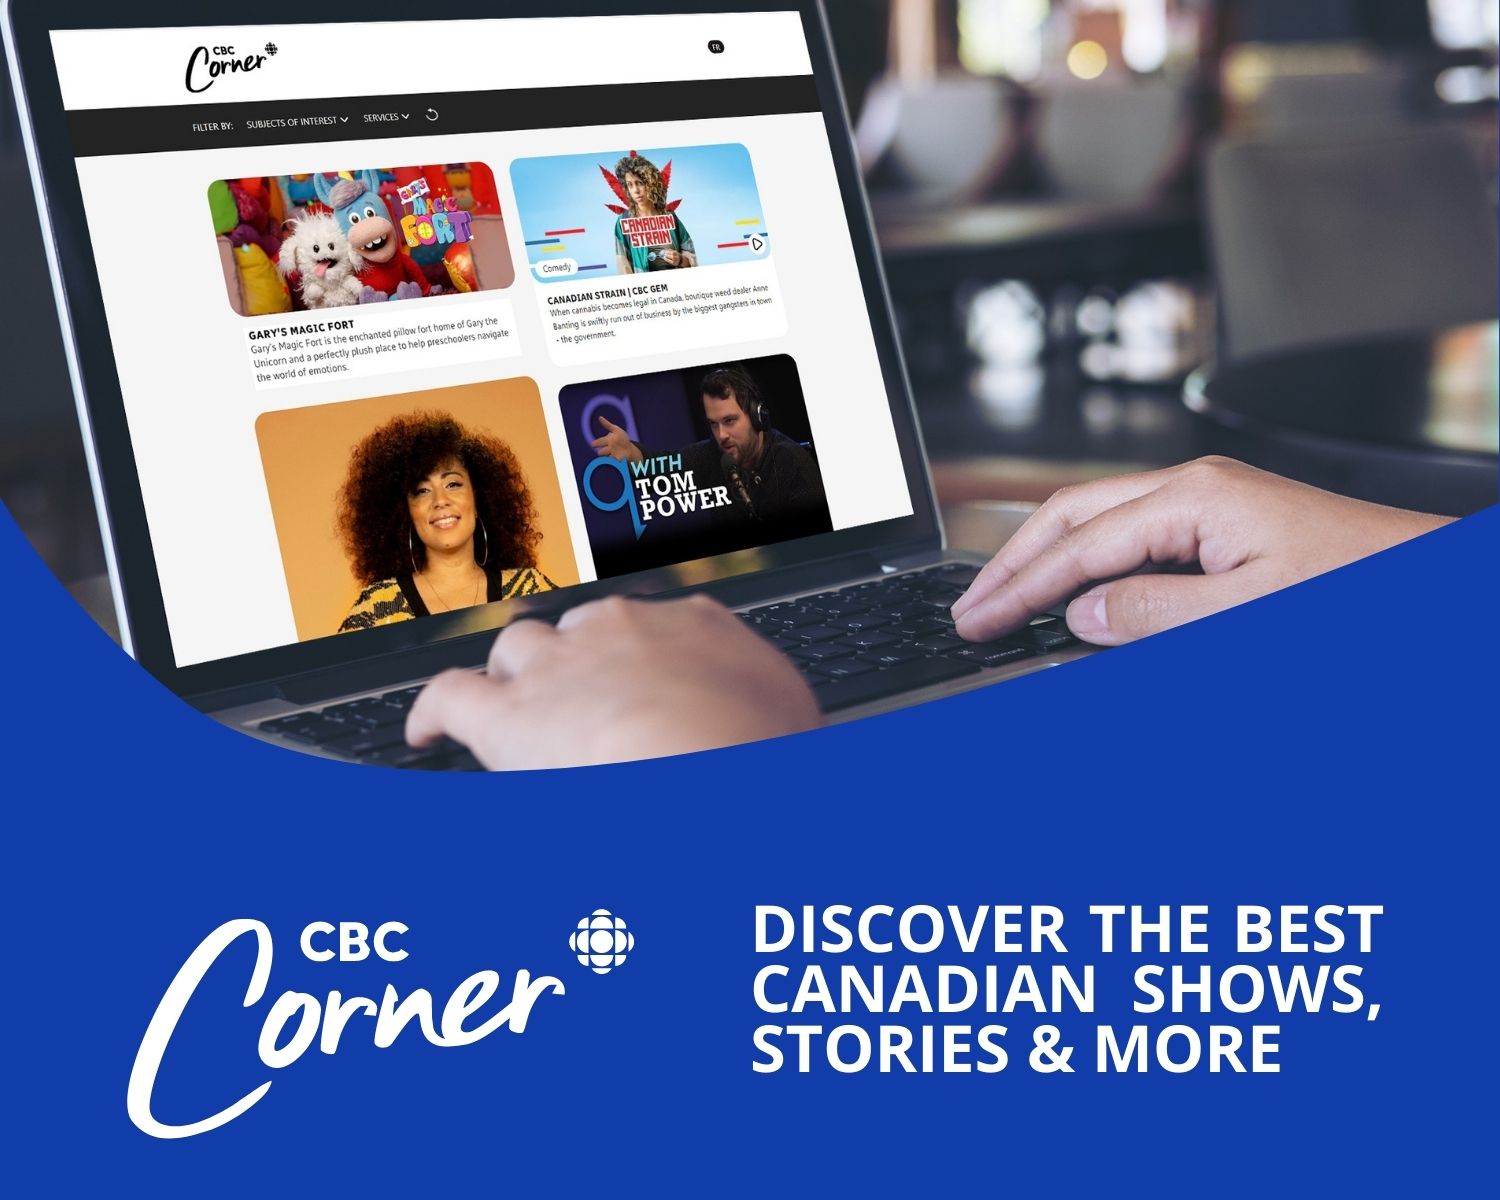 CBC Corner: "Discover the best Canadian shows, stories and more" - a picture of someone on the CBC Corner browser on their laptop